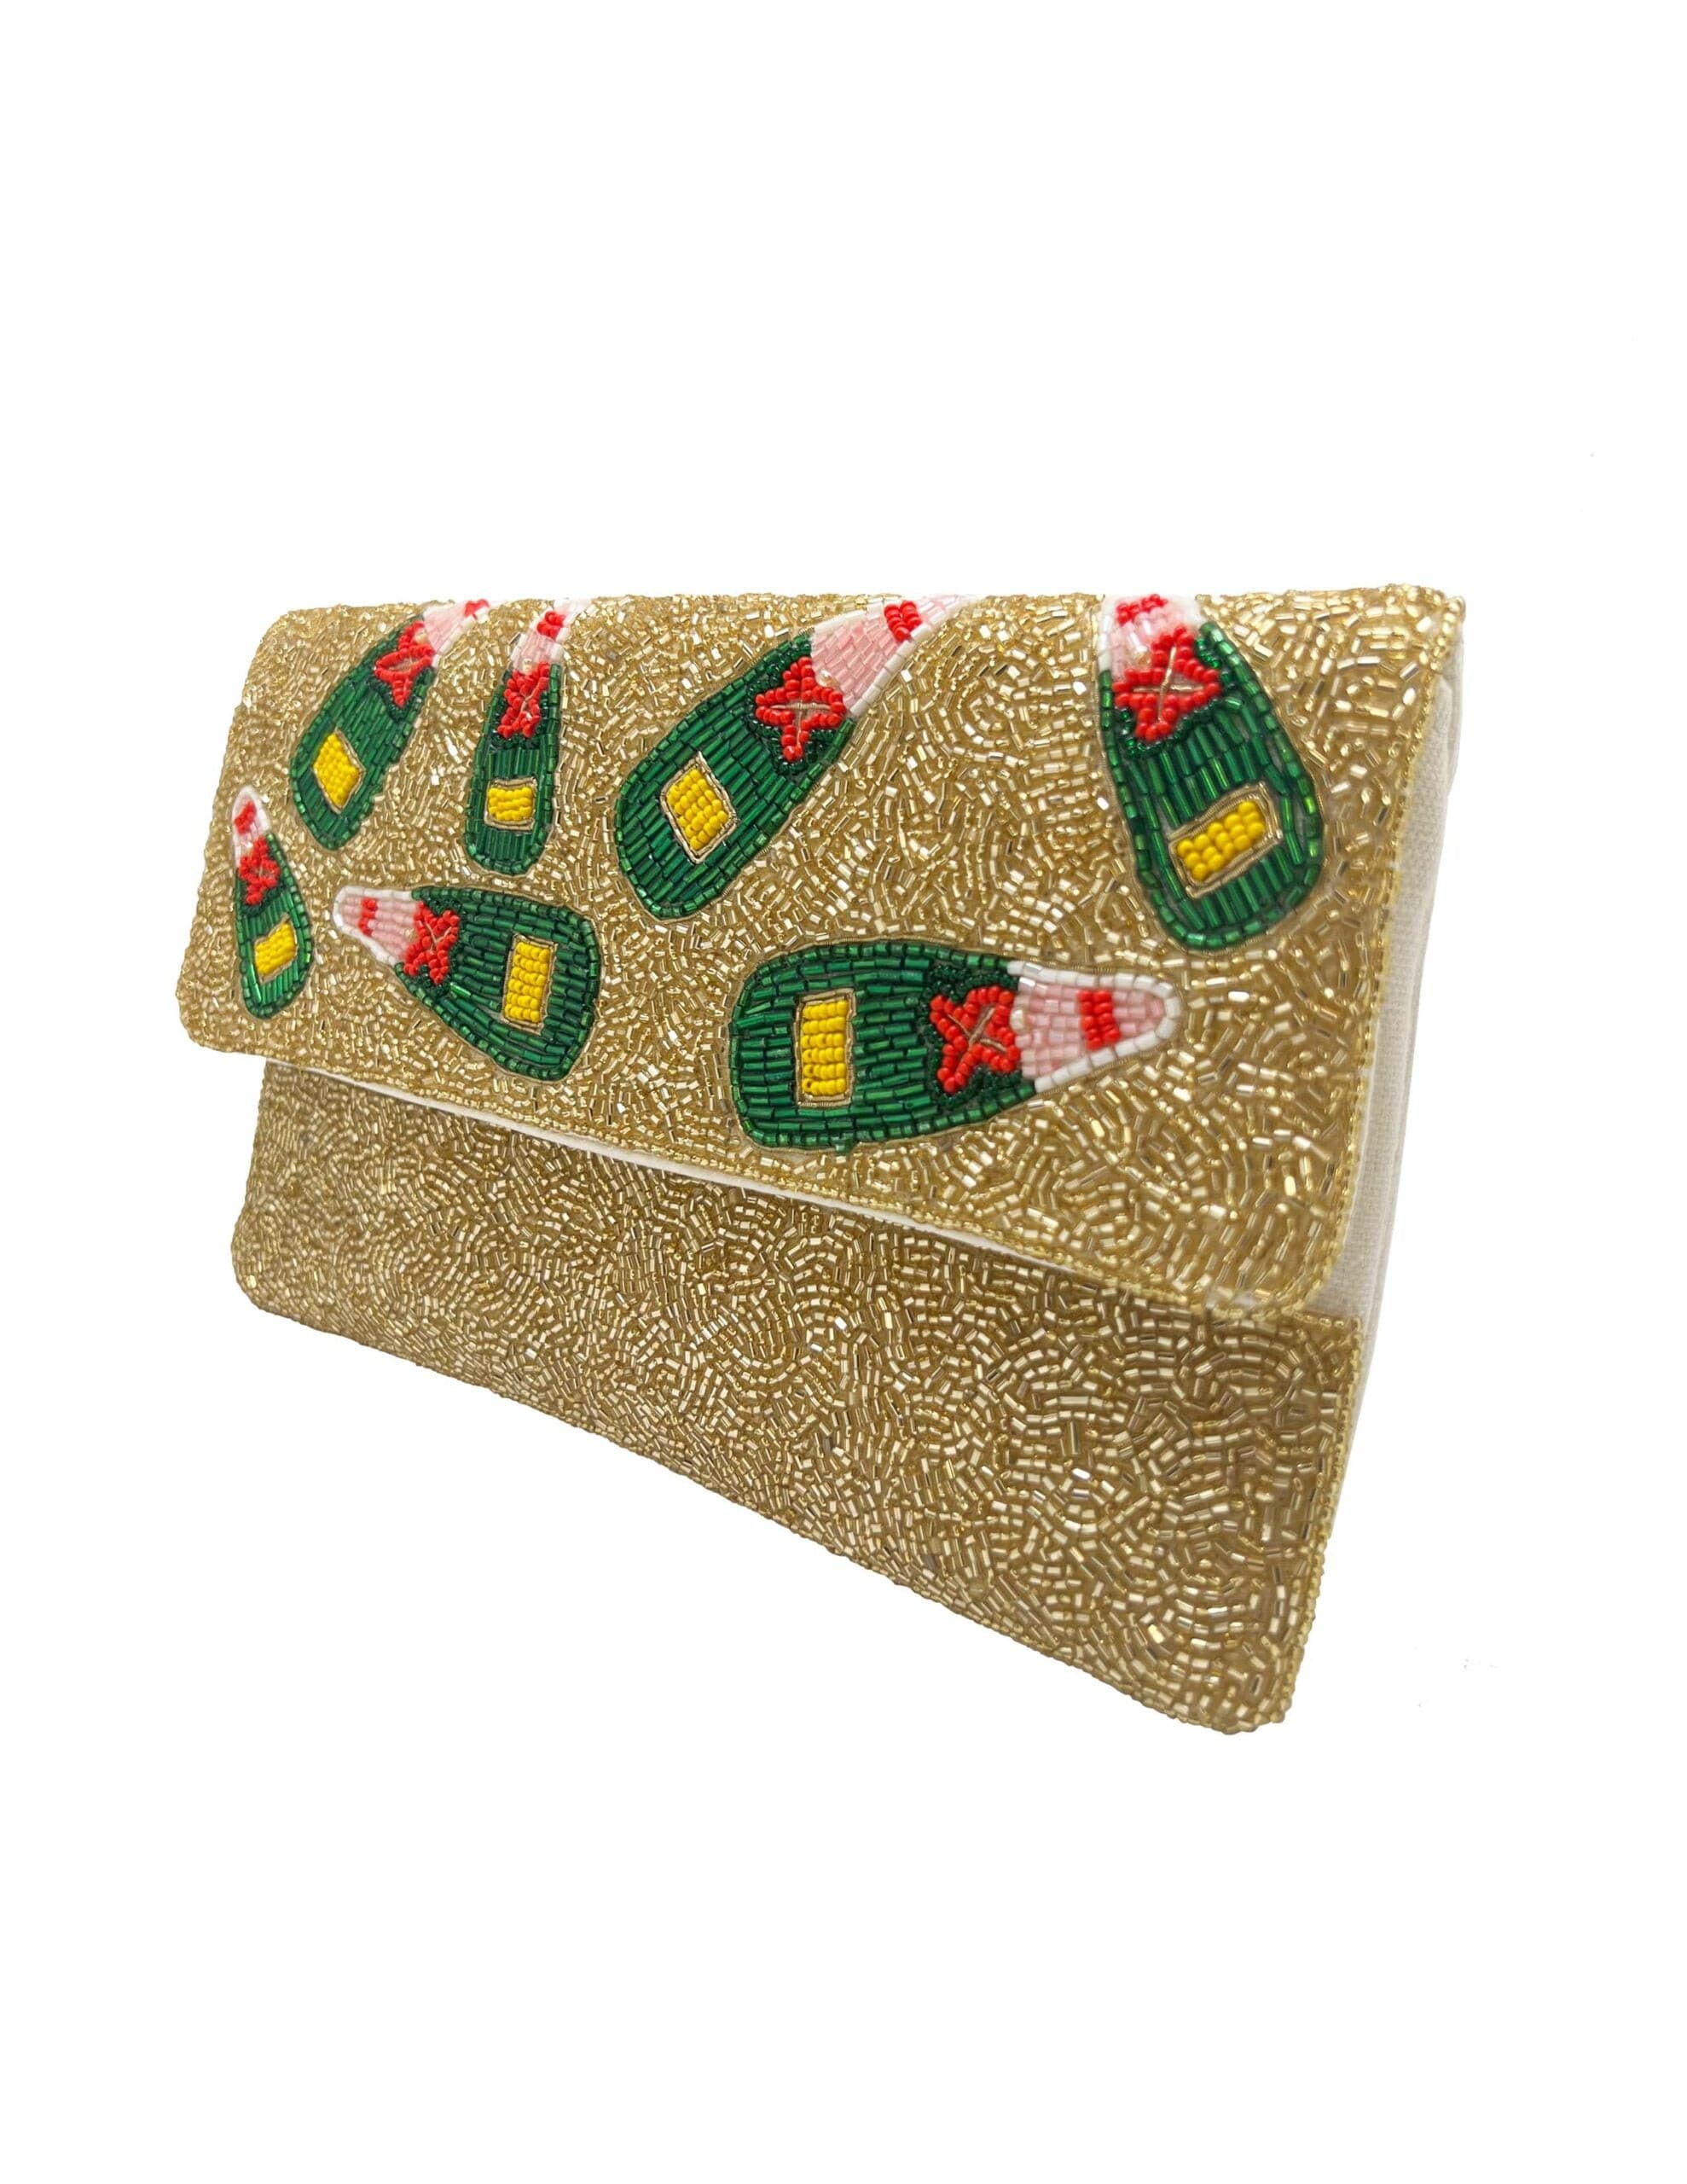 Champagne Beaded Clutch.